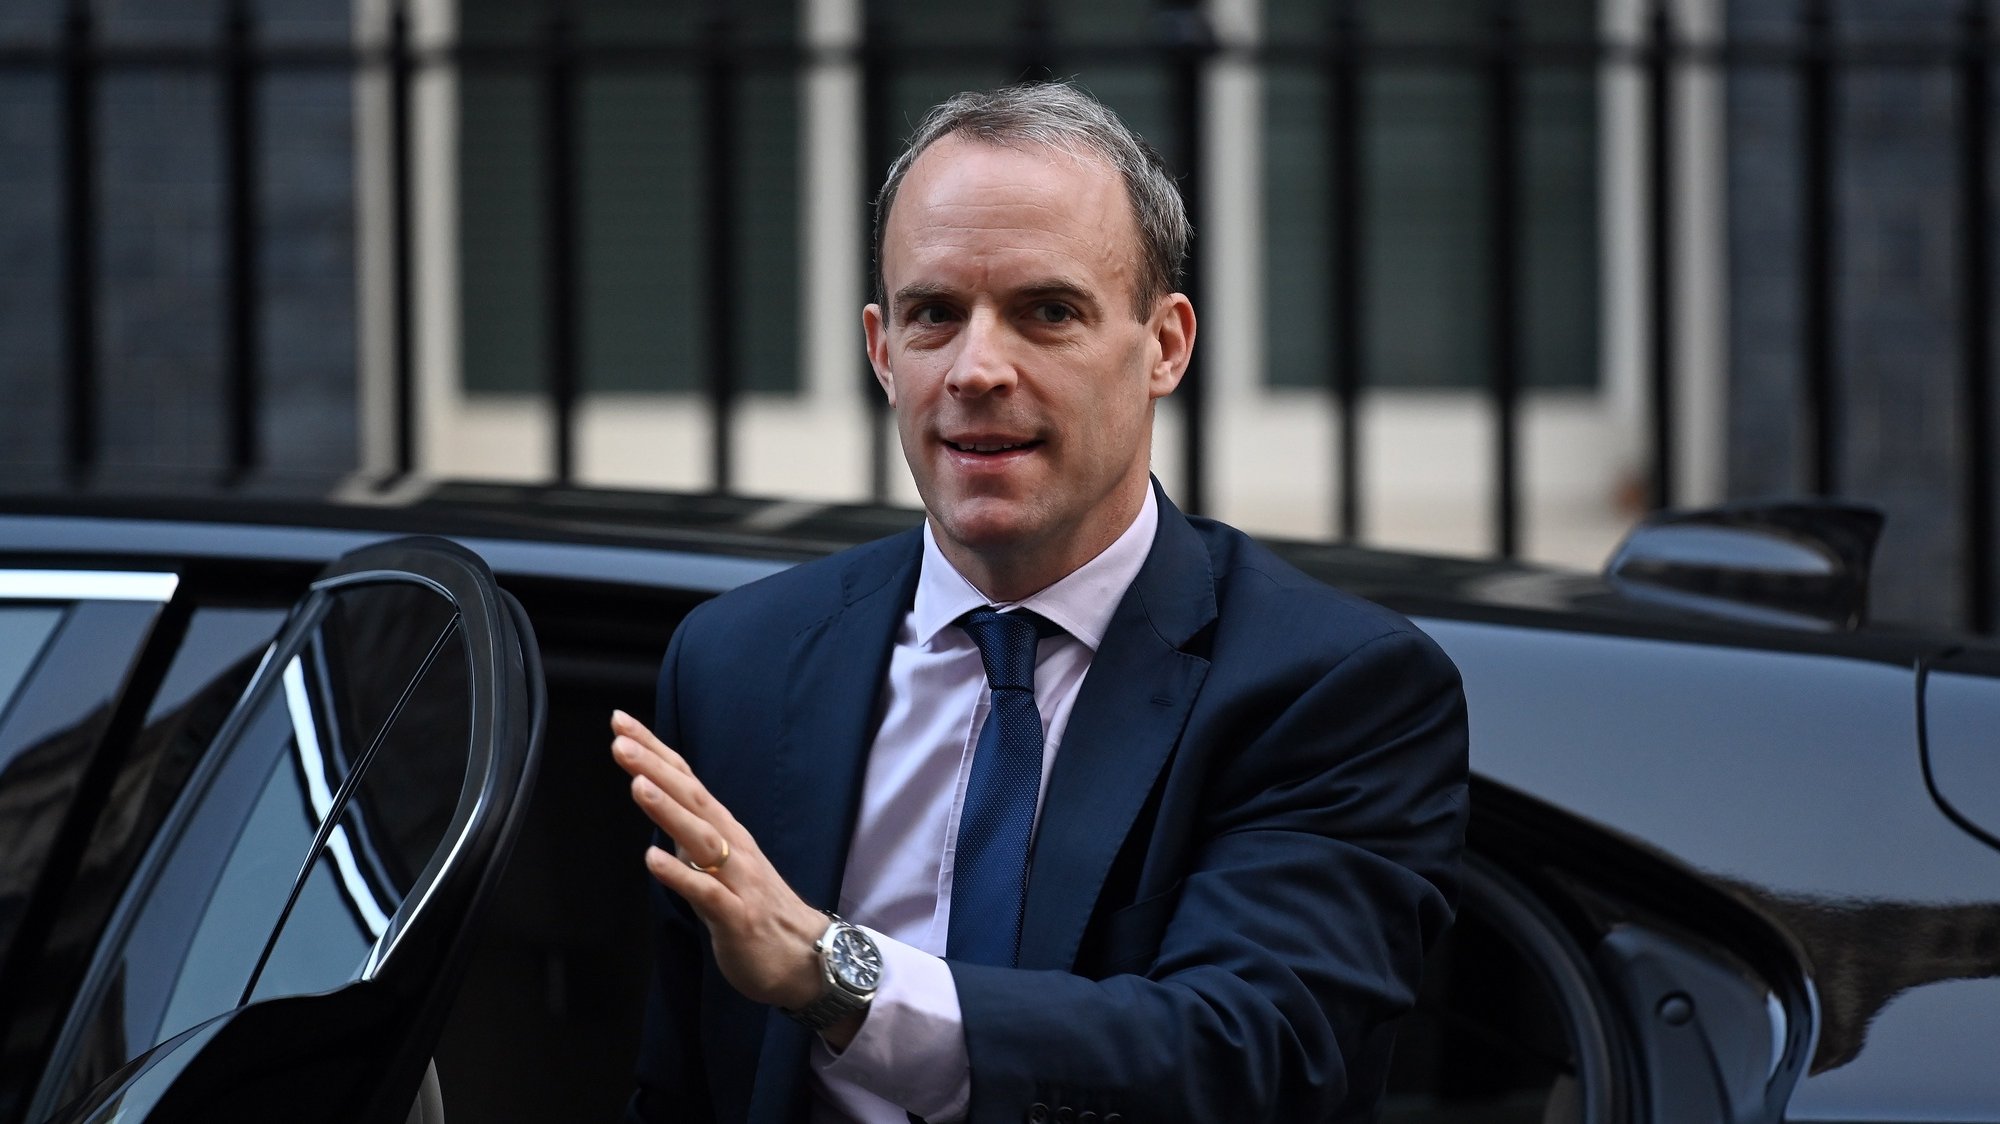 epa09585167 British Deputy Prime Minister, Lord Chancellor and Secretary of State for Justice Dominic Raab arrives for a cabinet meeting at 10 Downing Street  in London, Britain, 16 November 2021.  EPA-EFE/ANDY RAIN